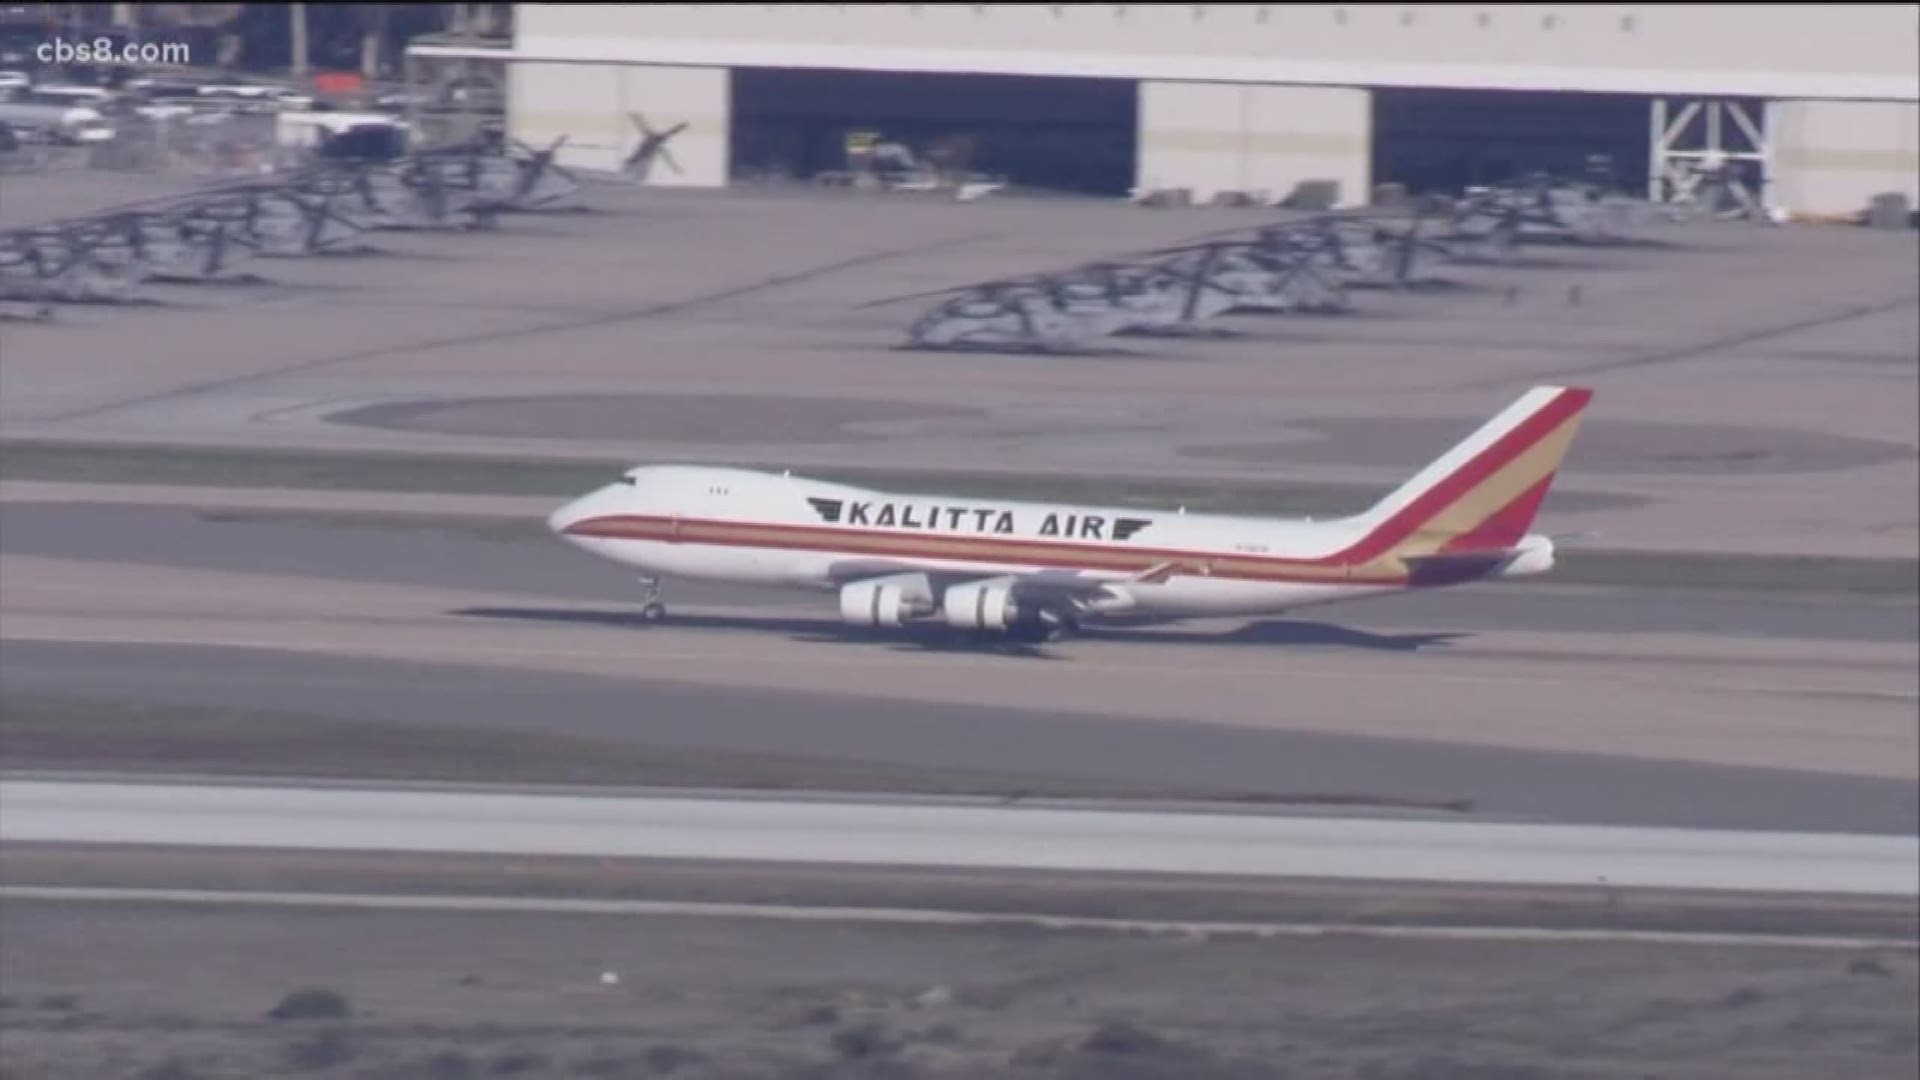 The plane landed at MCAS Miramar shortly before 8:50 a.m. It was not immediately clear how many passengers were aboard.